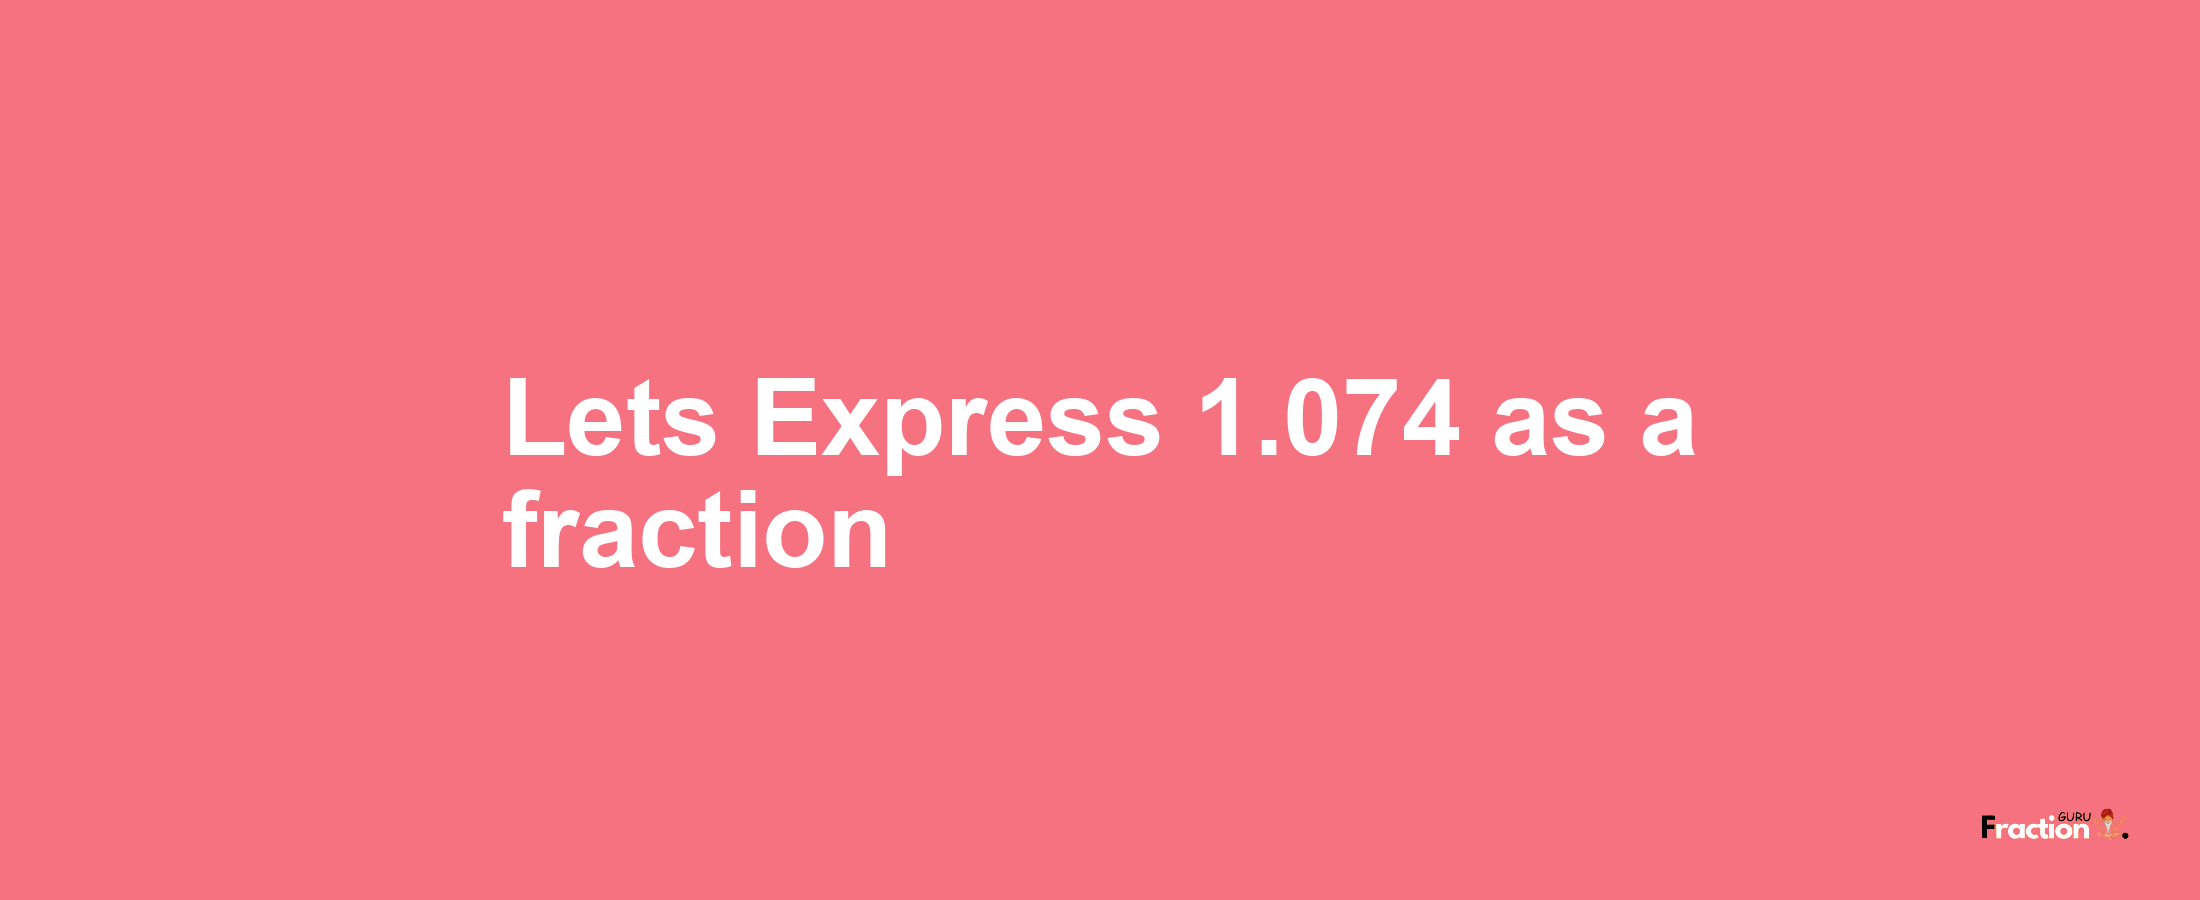 Lets Express 1.074 as afraction